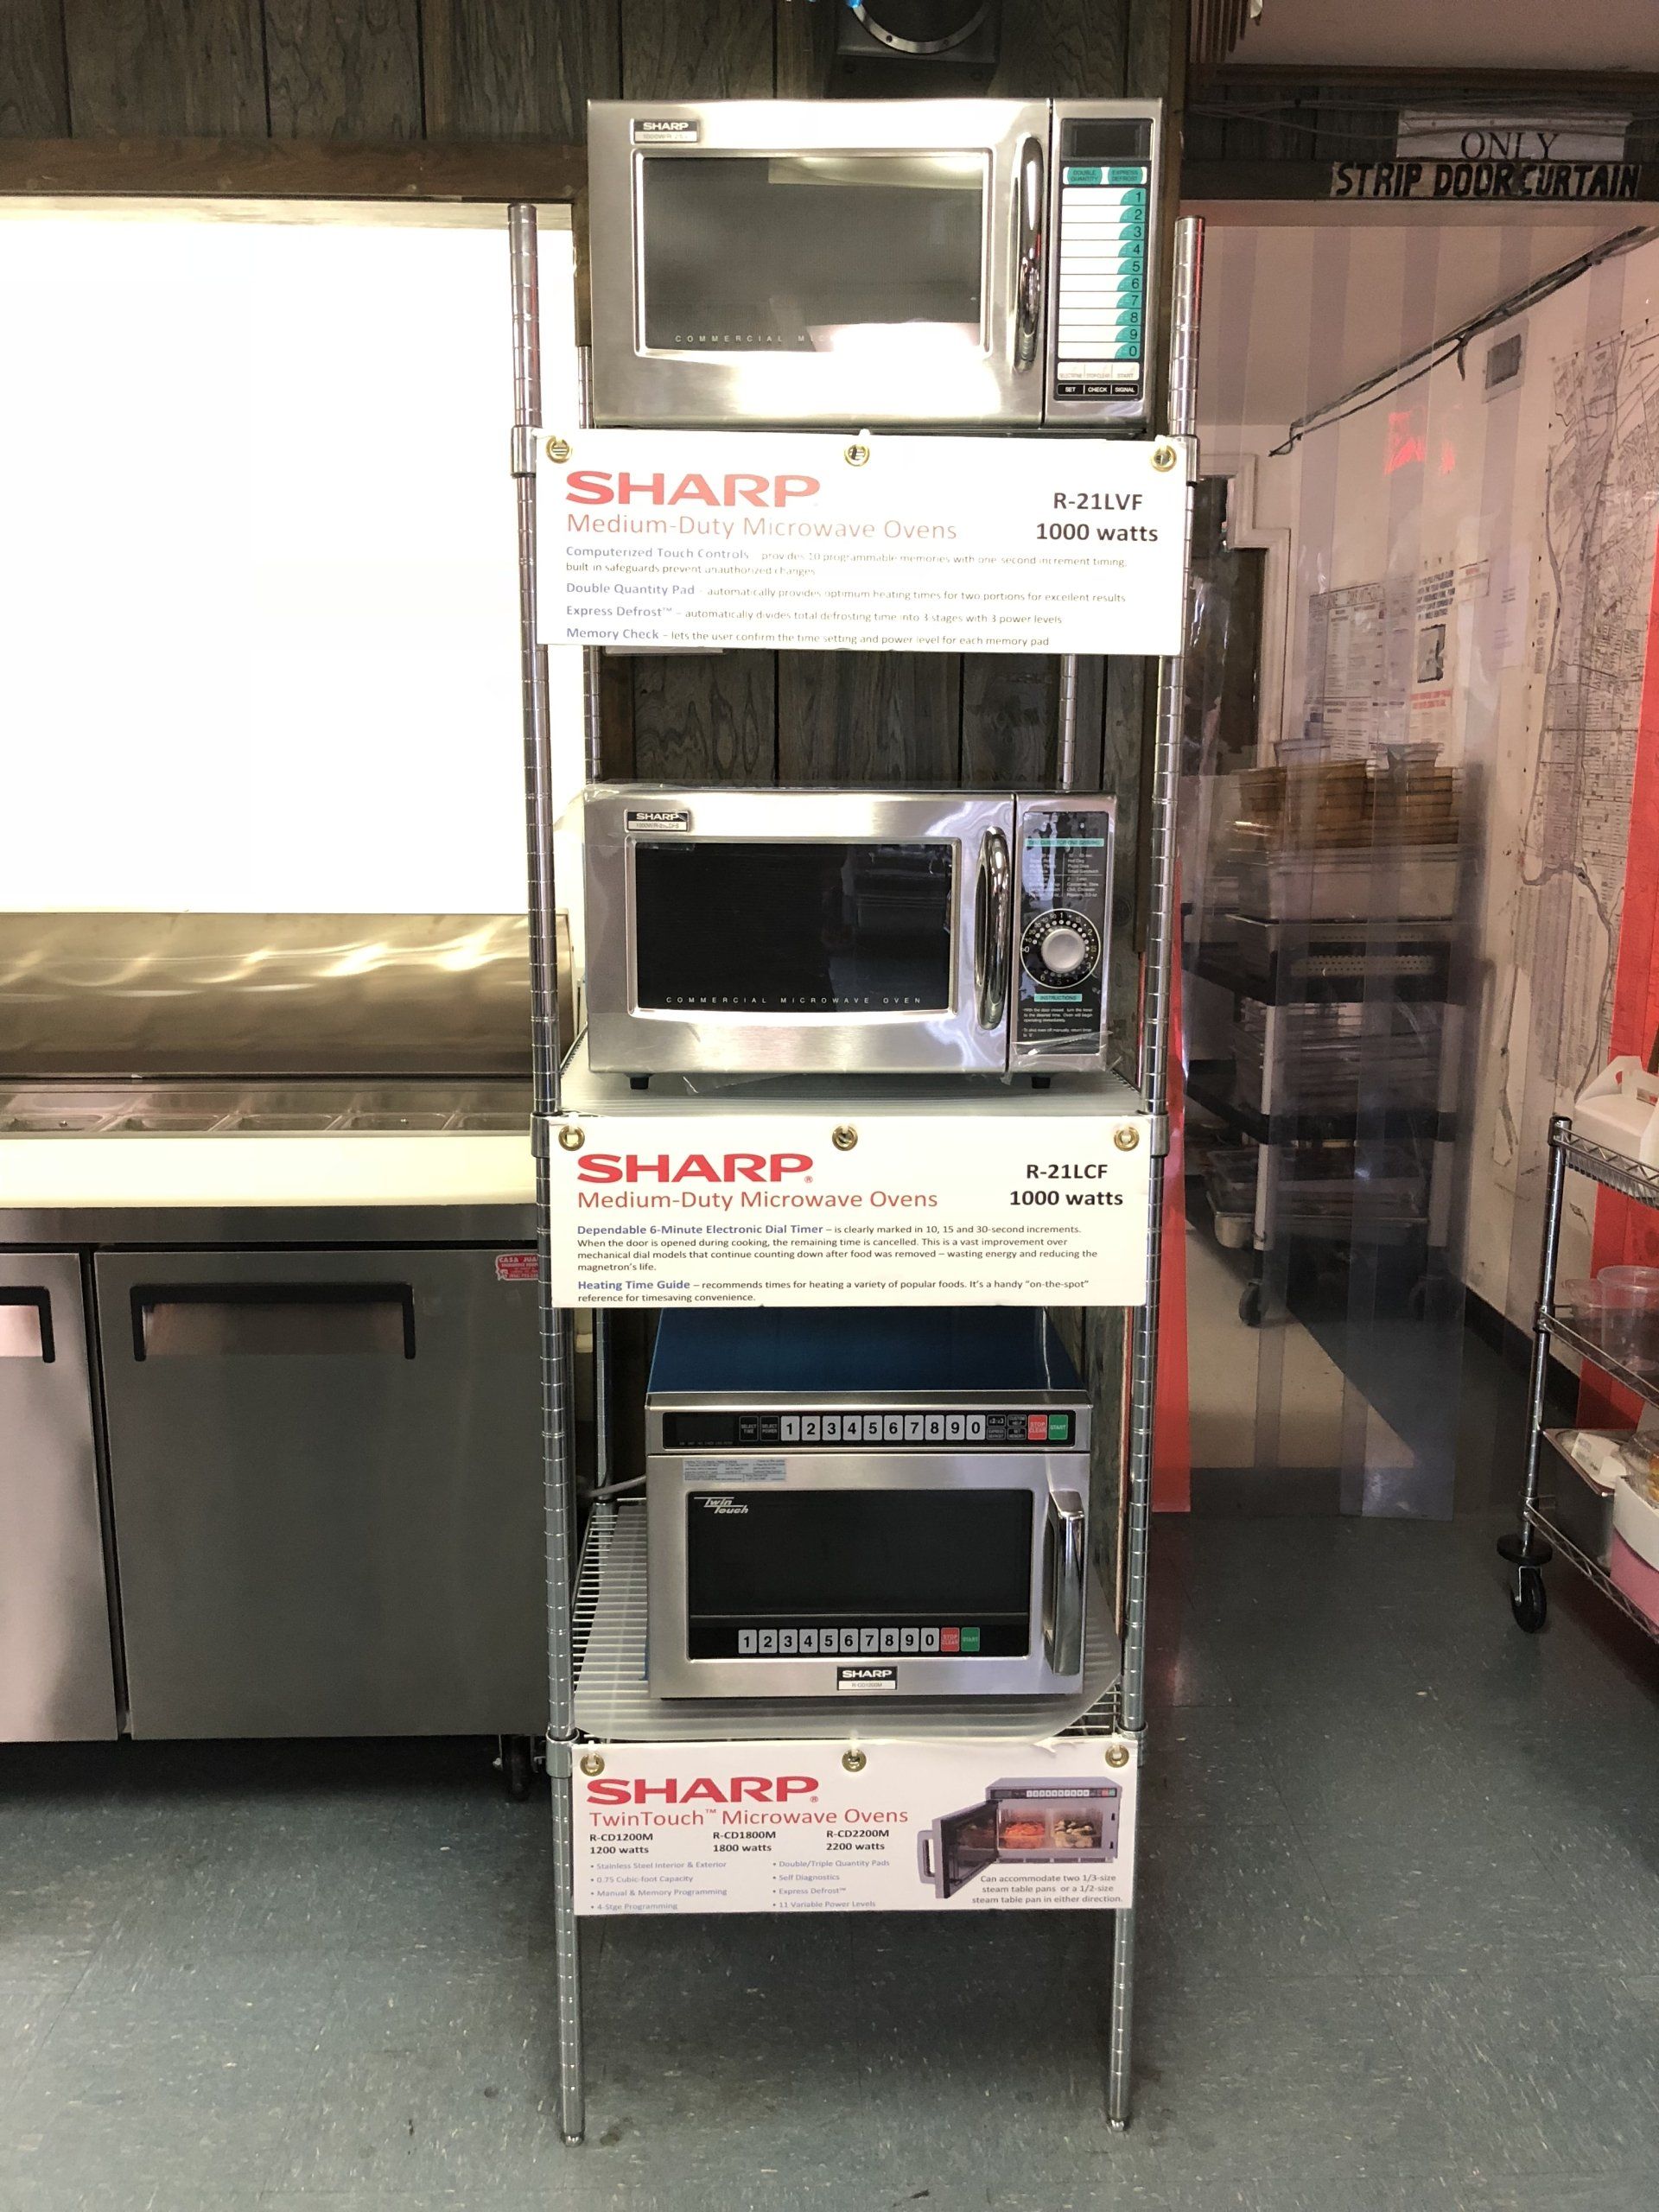 A display of sharp microwave ovens in a kitchen